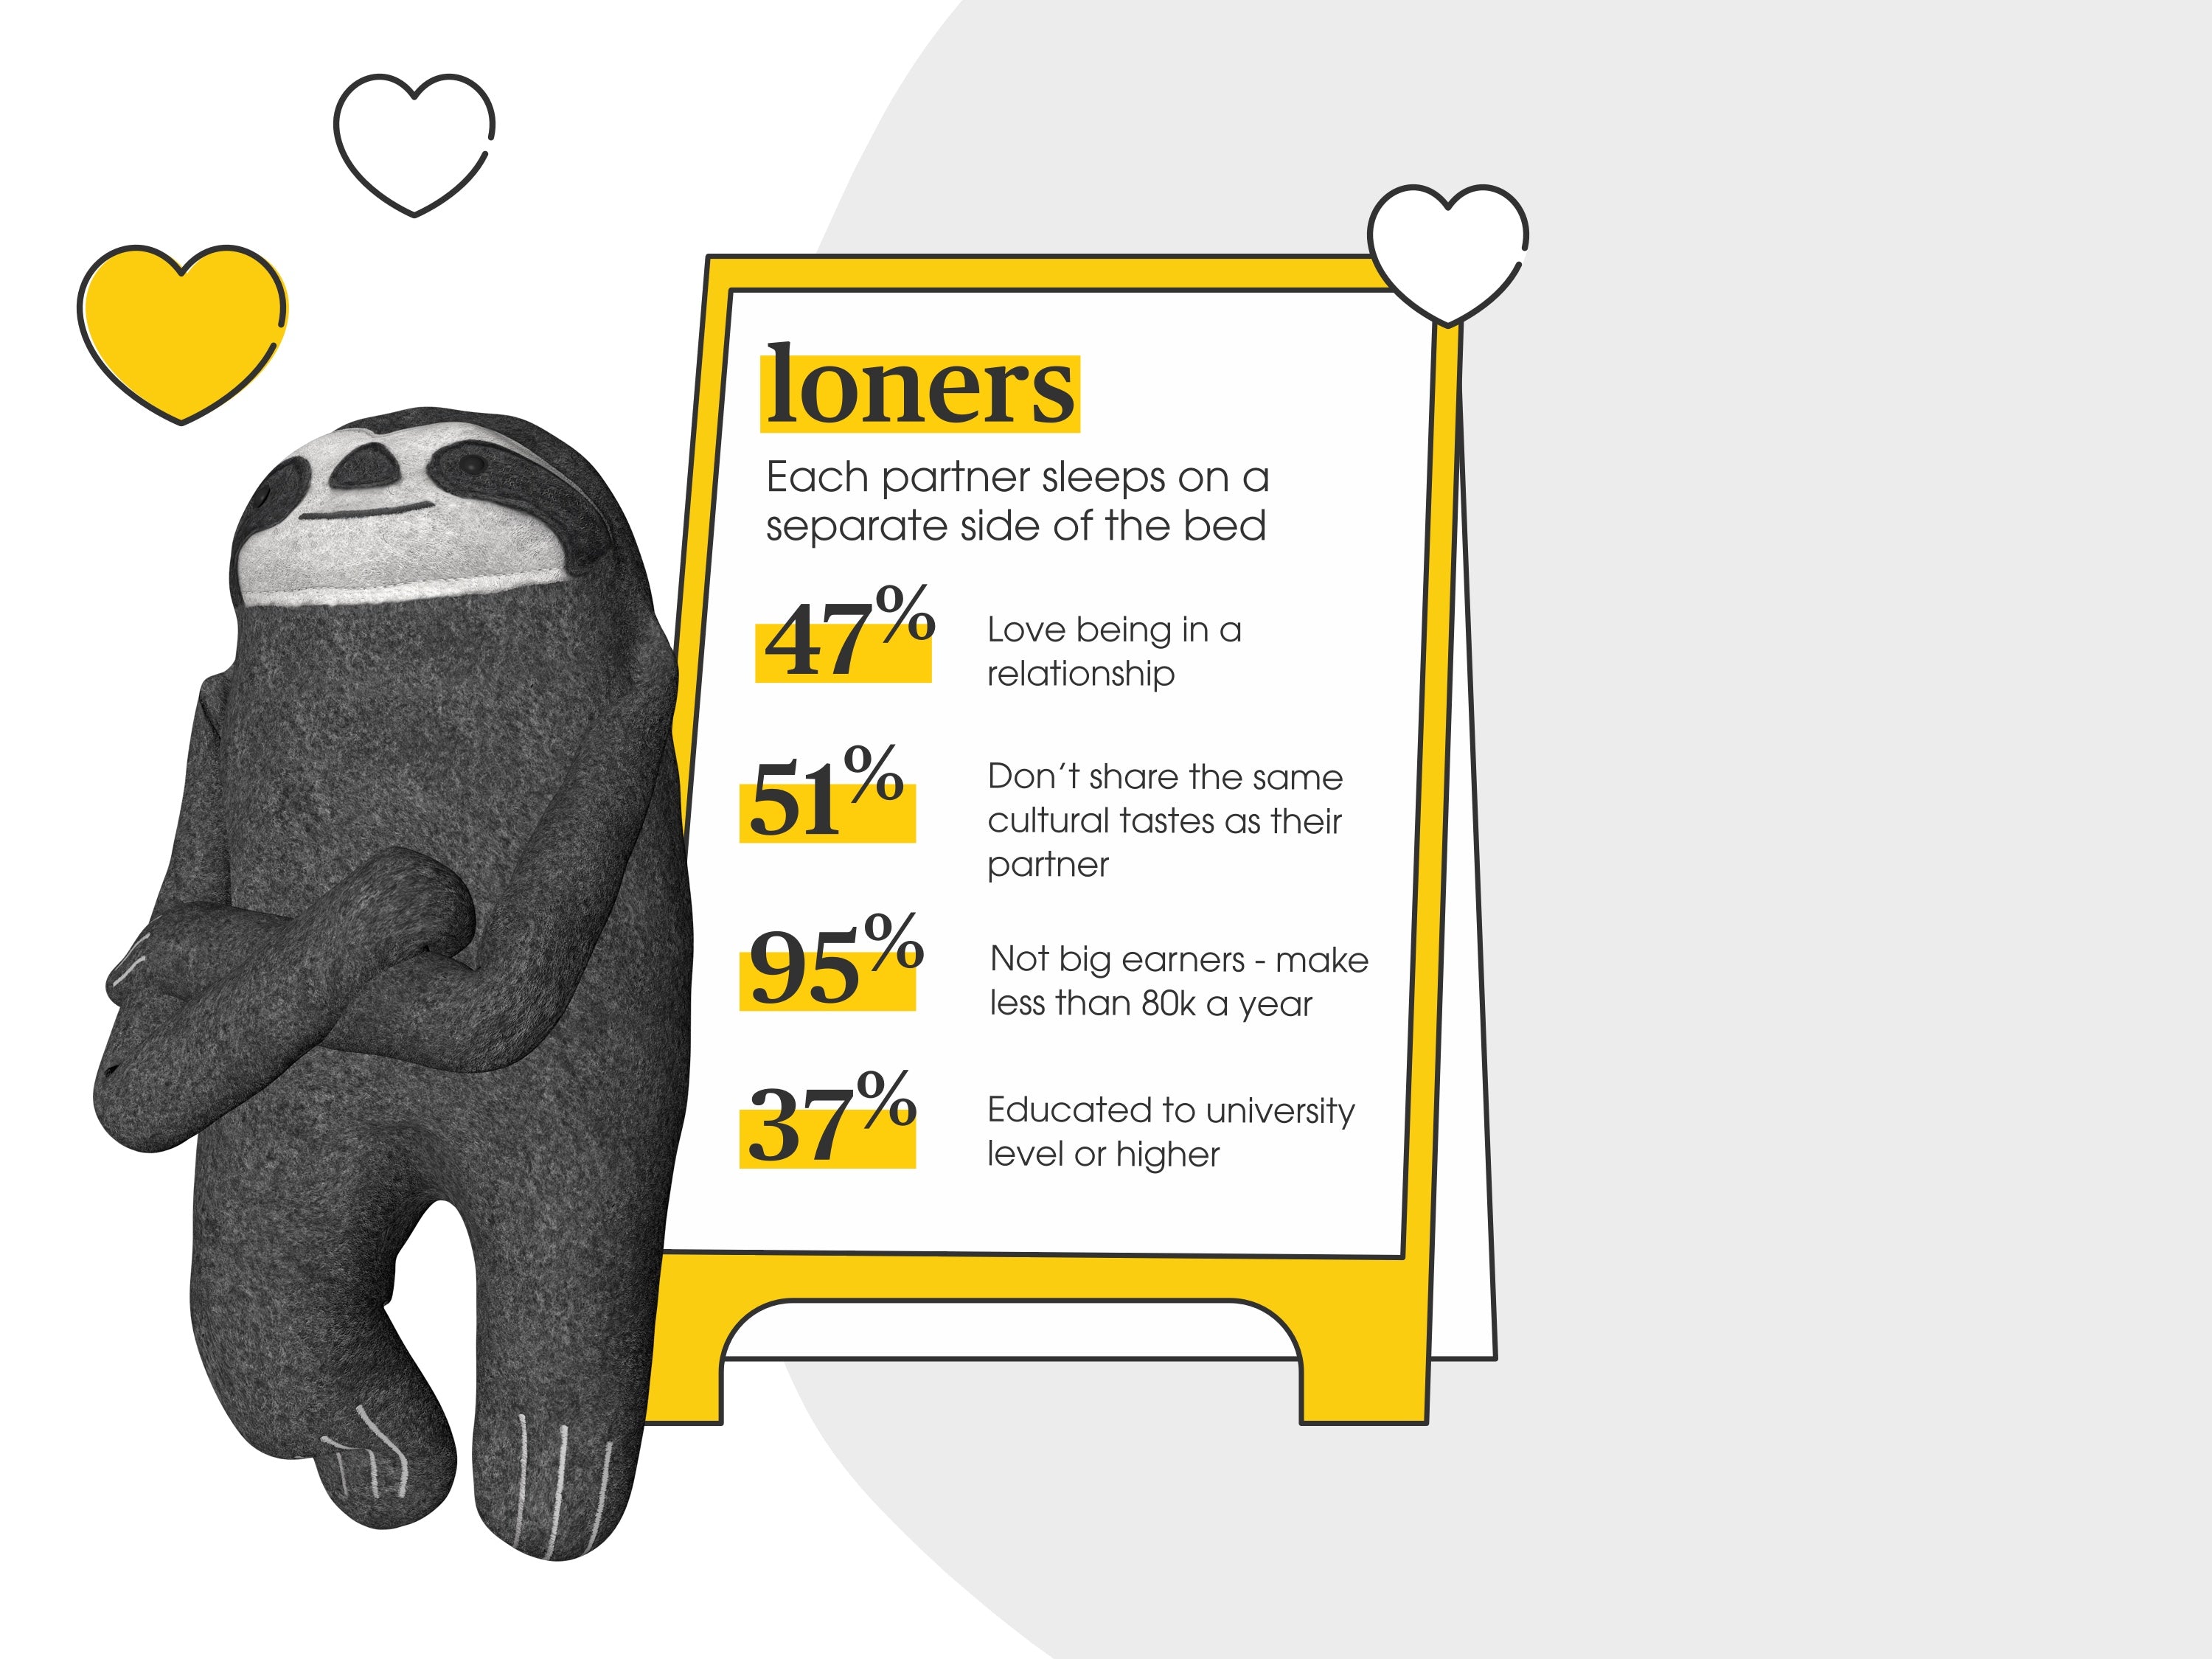 How couples sleep: loners. The eve sloth standing alone with his arms folded leaning up against the infographic board